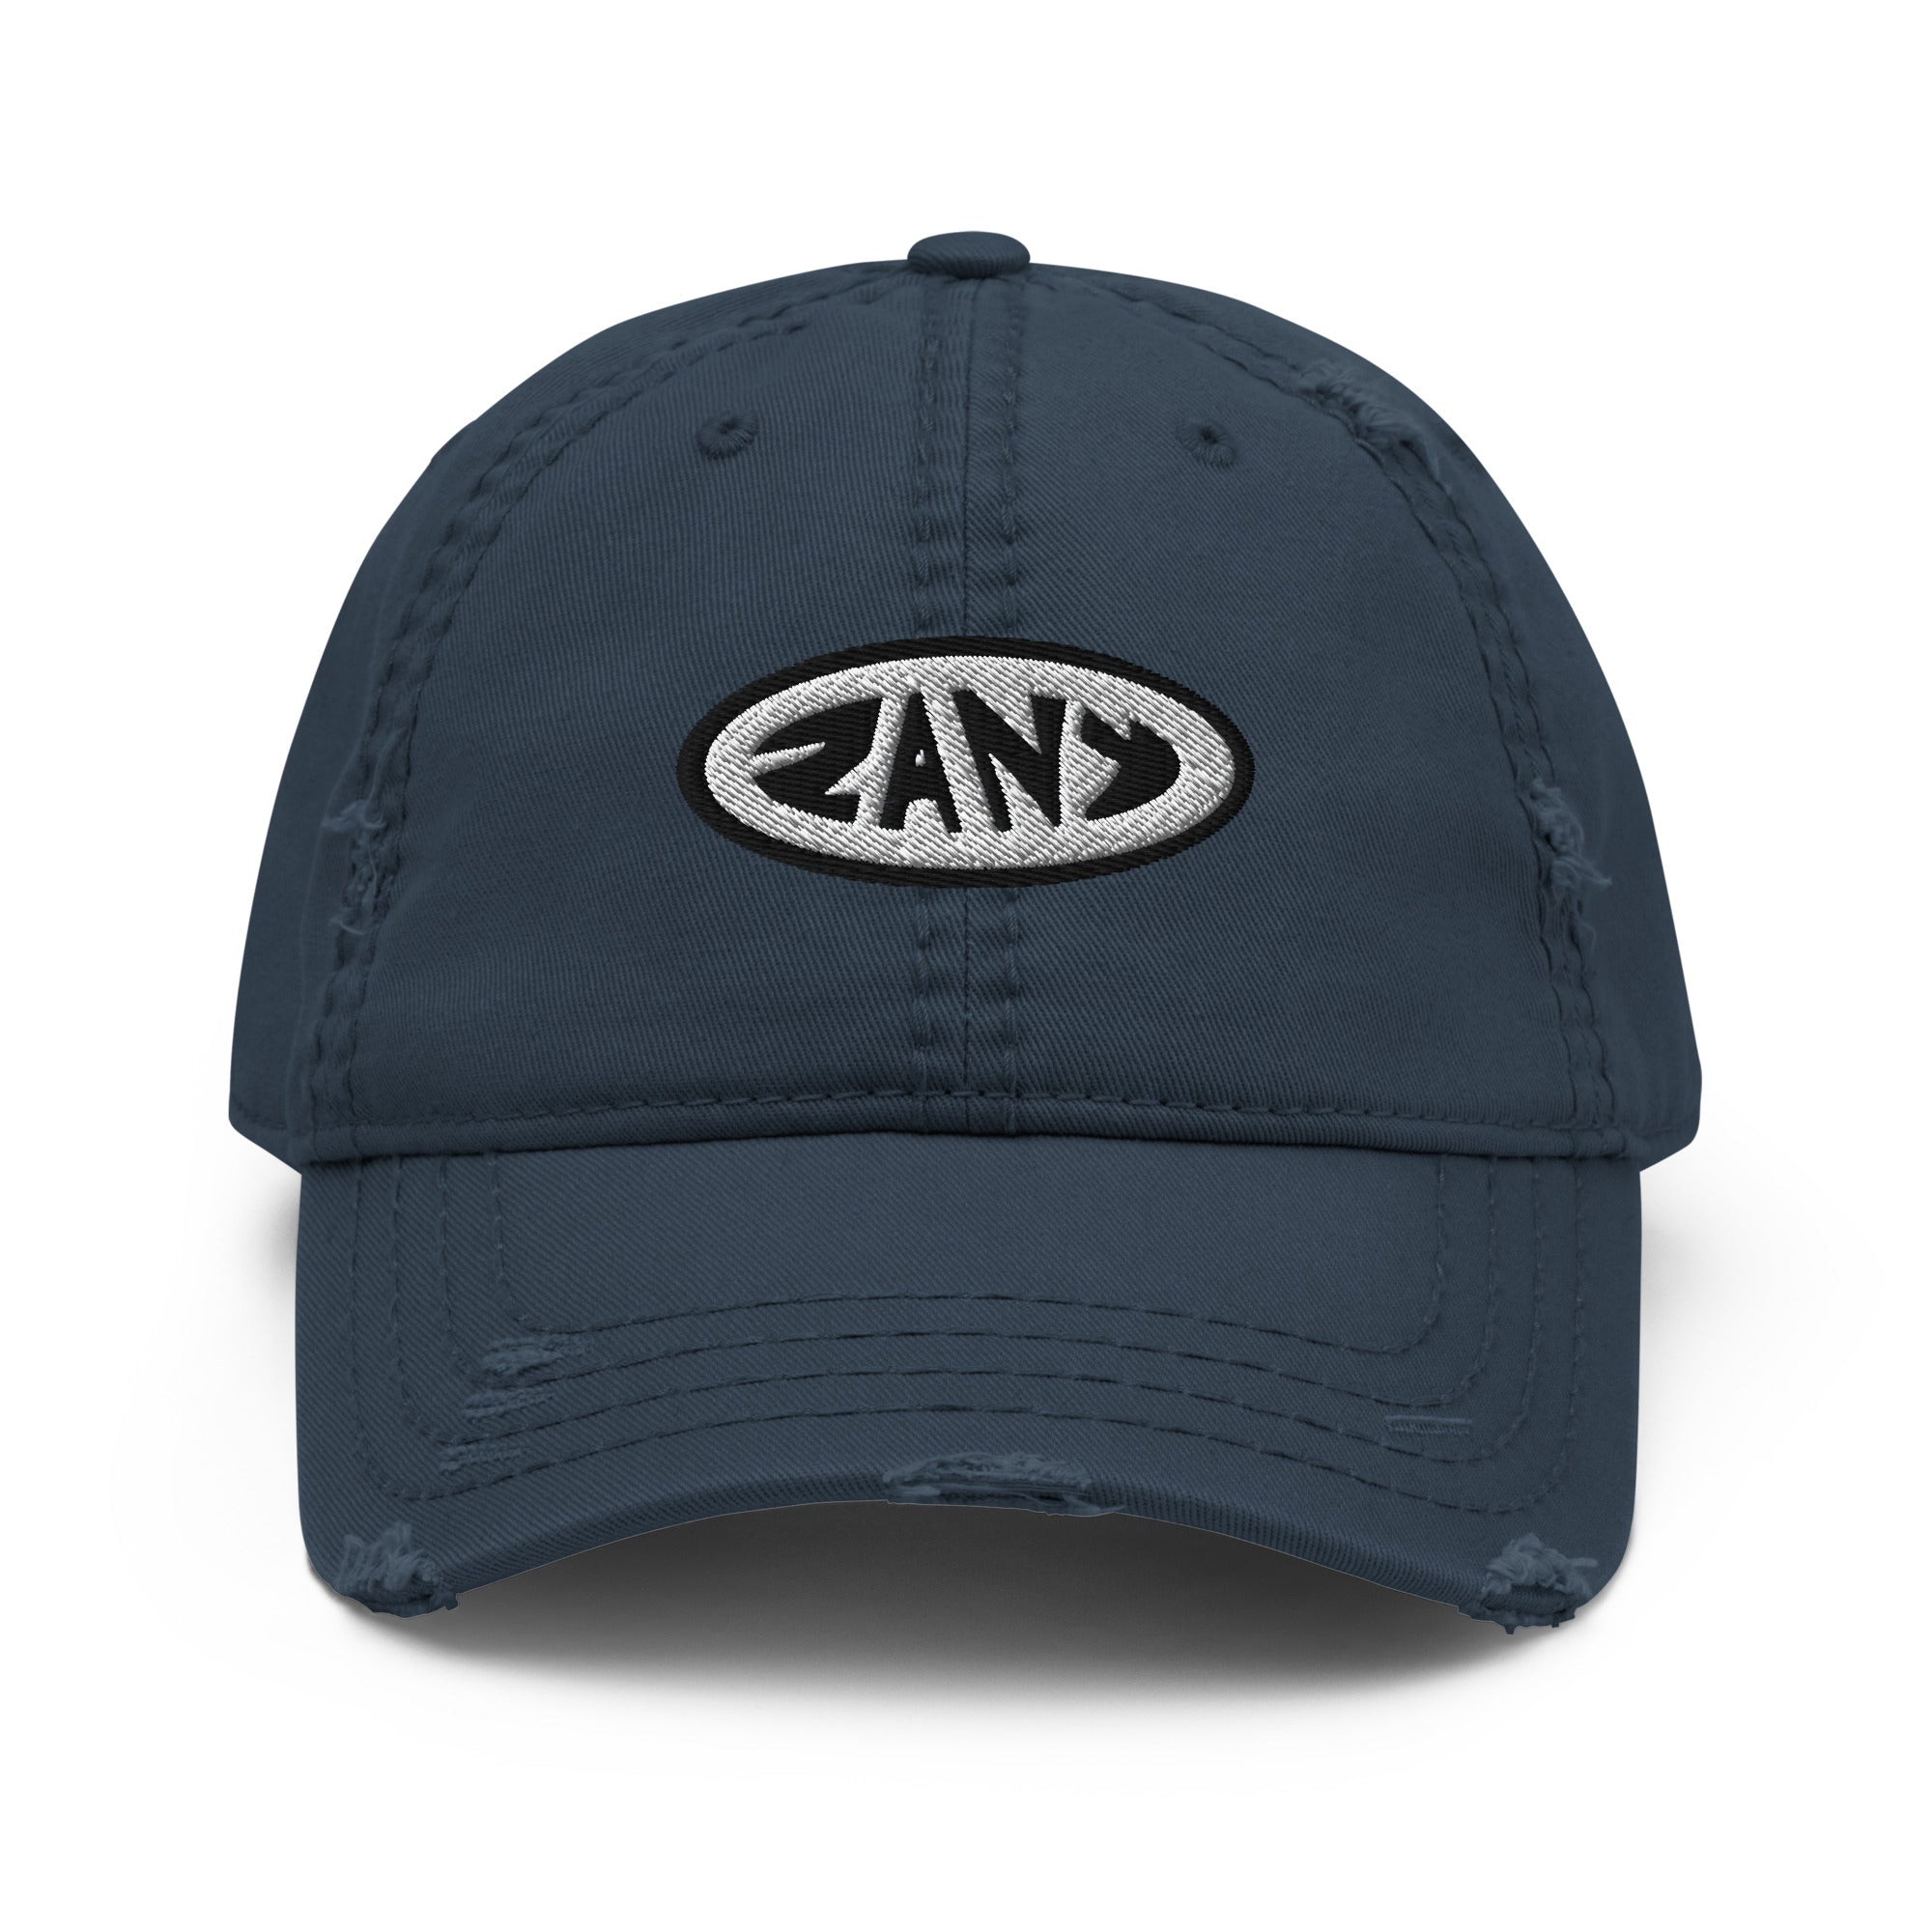 distressed-dad-hat-navy-front-6610a66554613.jpg